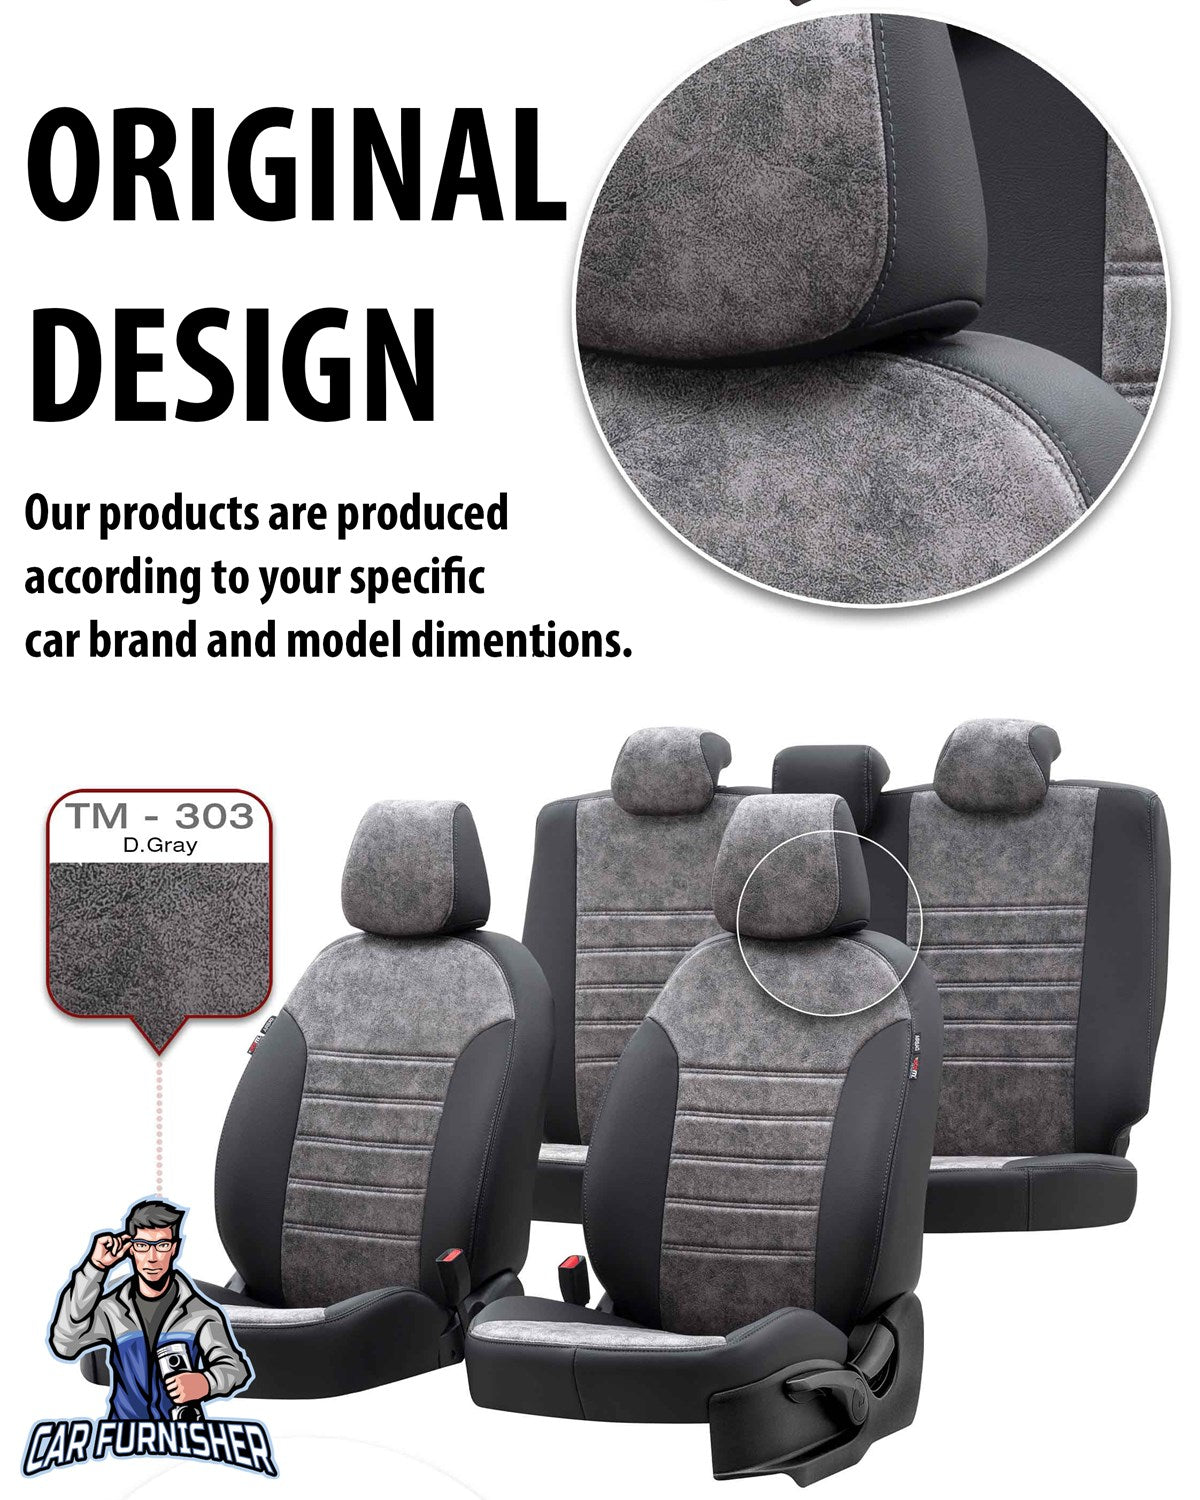 Isuzu D-Max Seat Covers Milano Suede Design Smoked Black Leather & Suede Fabric